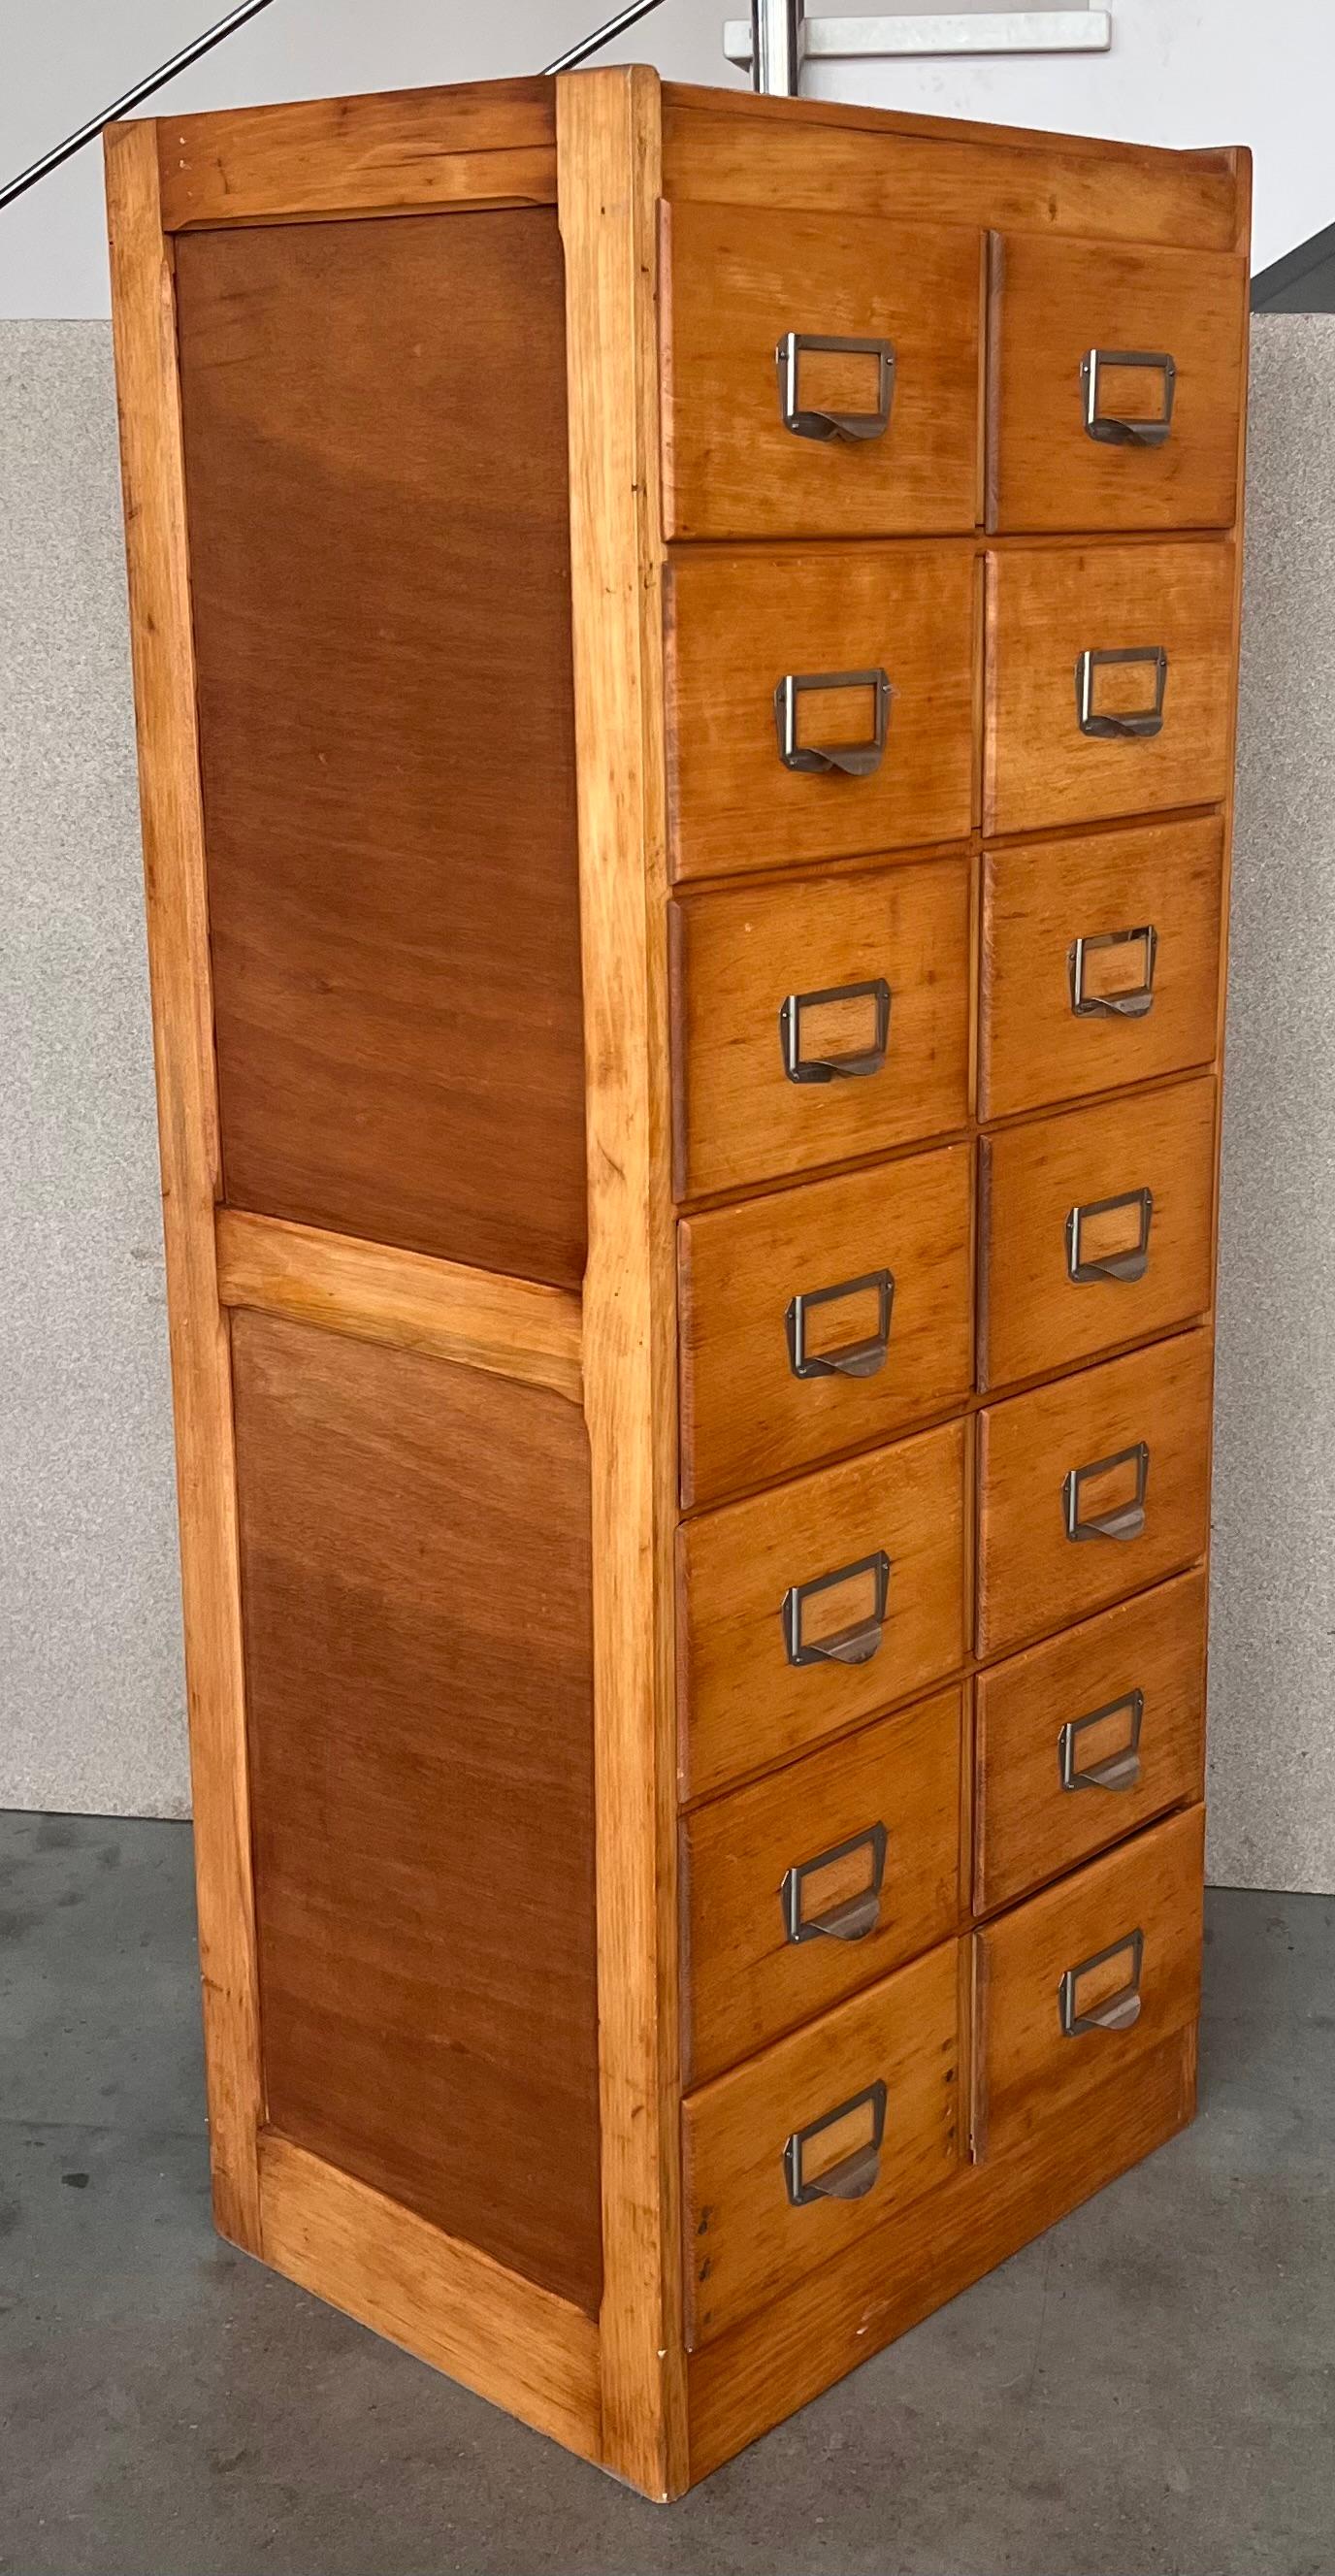 Large Bank of French Art Deco Filing Drawers, circa 1930s In Good Condition For Sale In Miami, FL